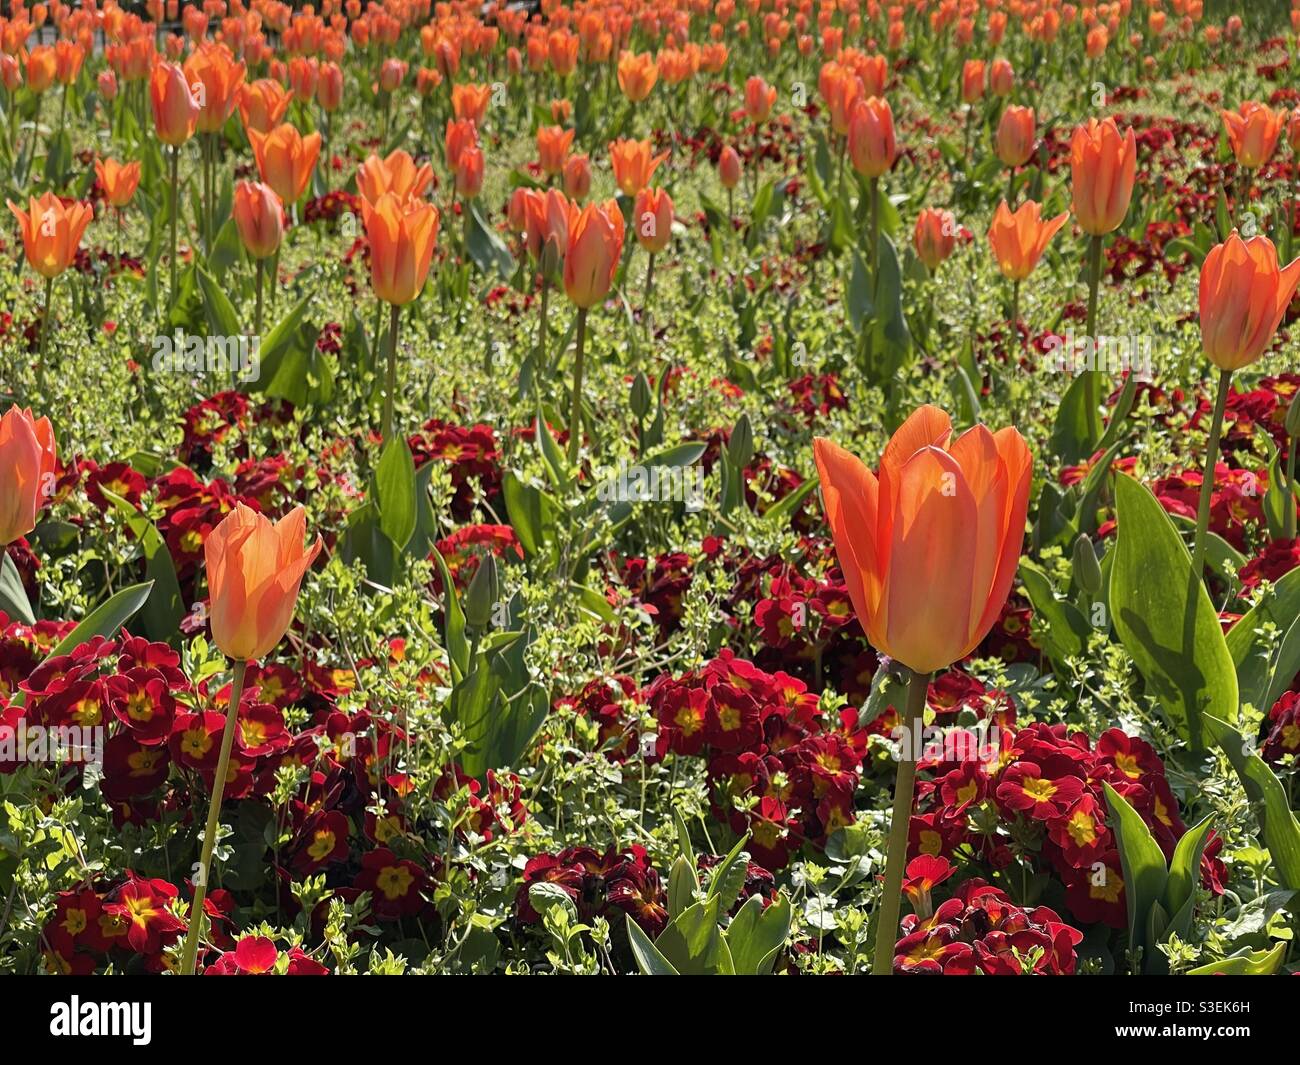 Orange tulips in a flower bed Stock Photo